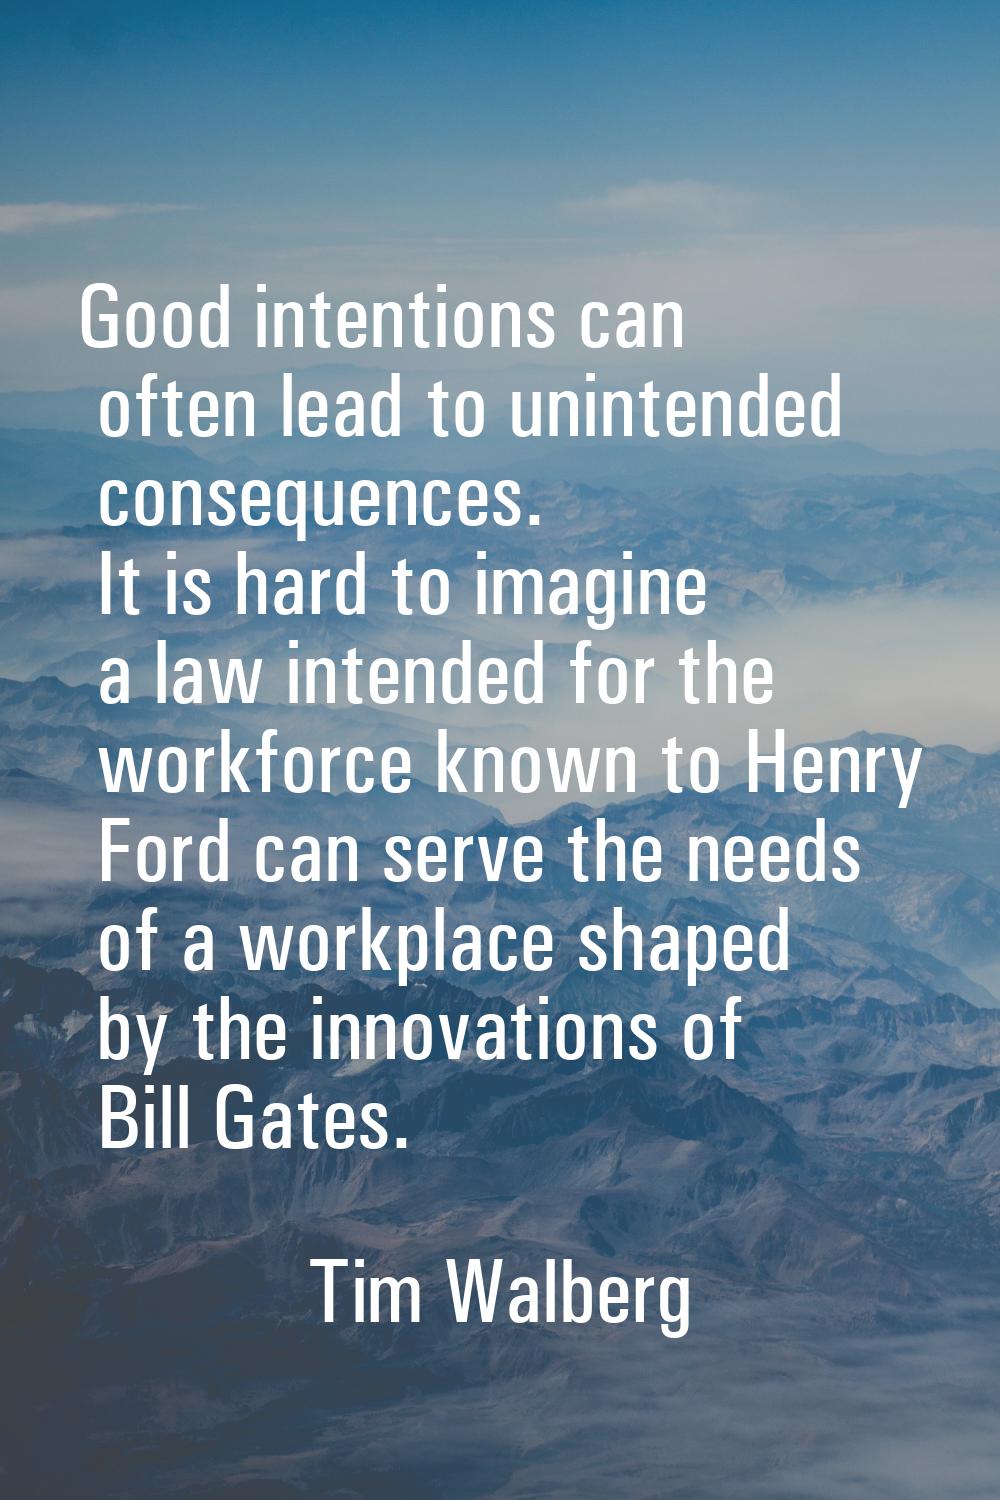 Good intentions can often lead to unintended consequences. It is hard to imagine a law intended for